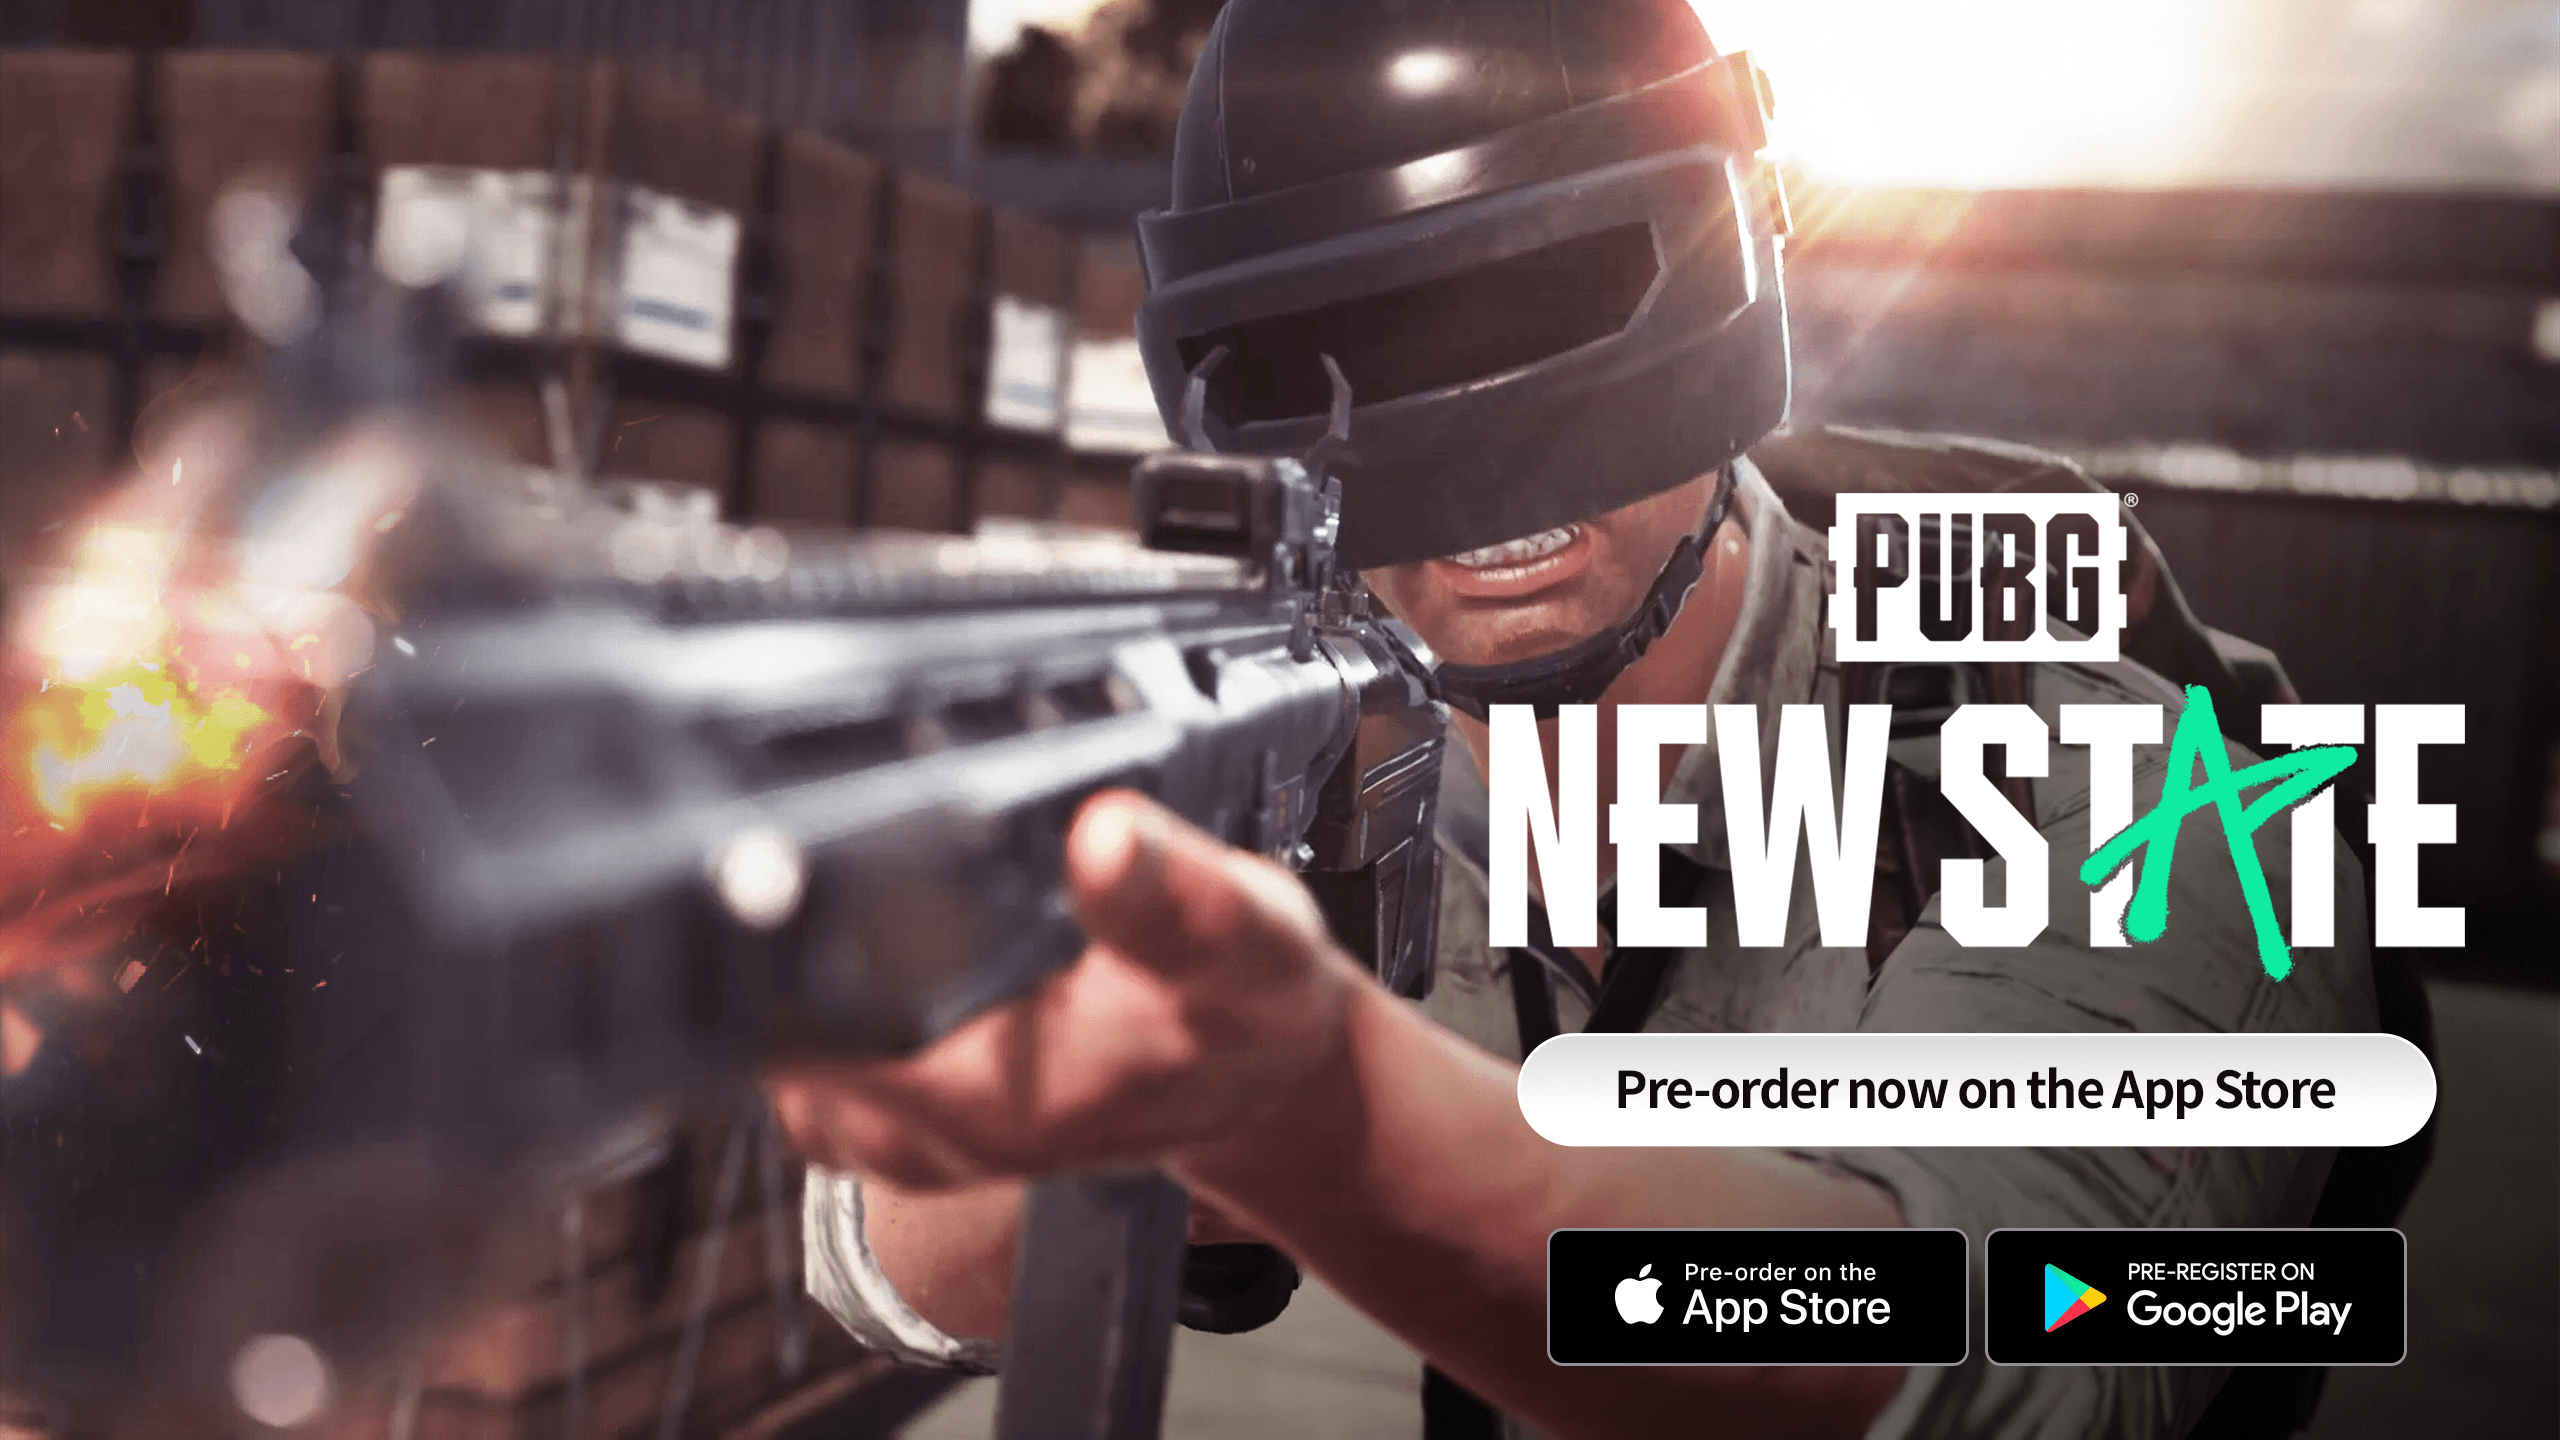 PUBG: NEW STATE 2021 Wallpapers